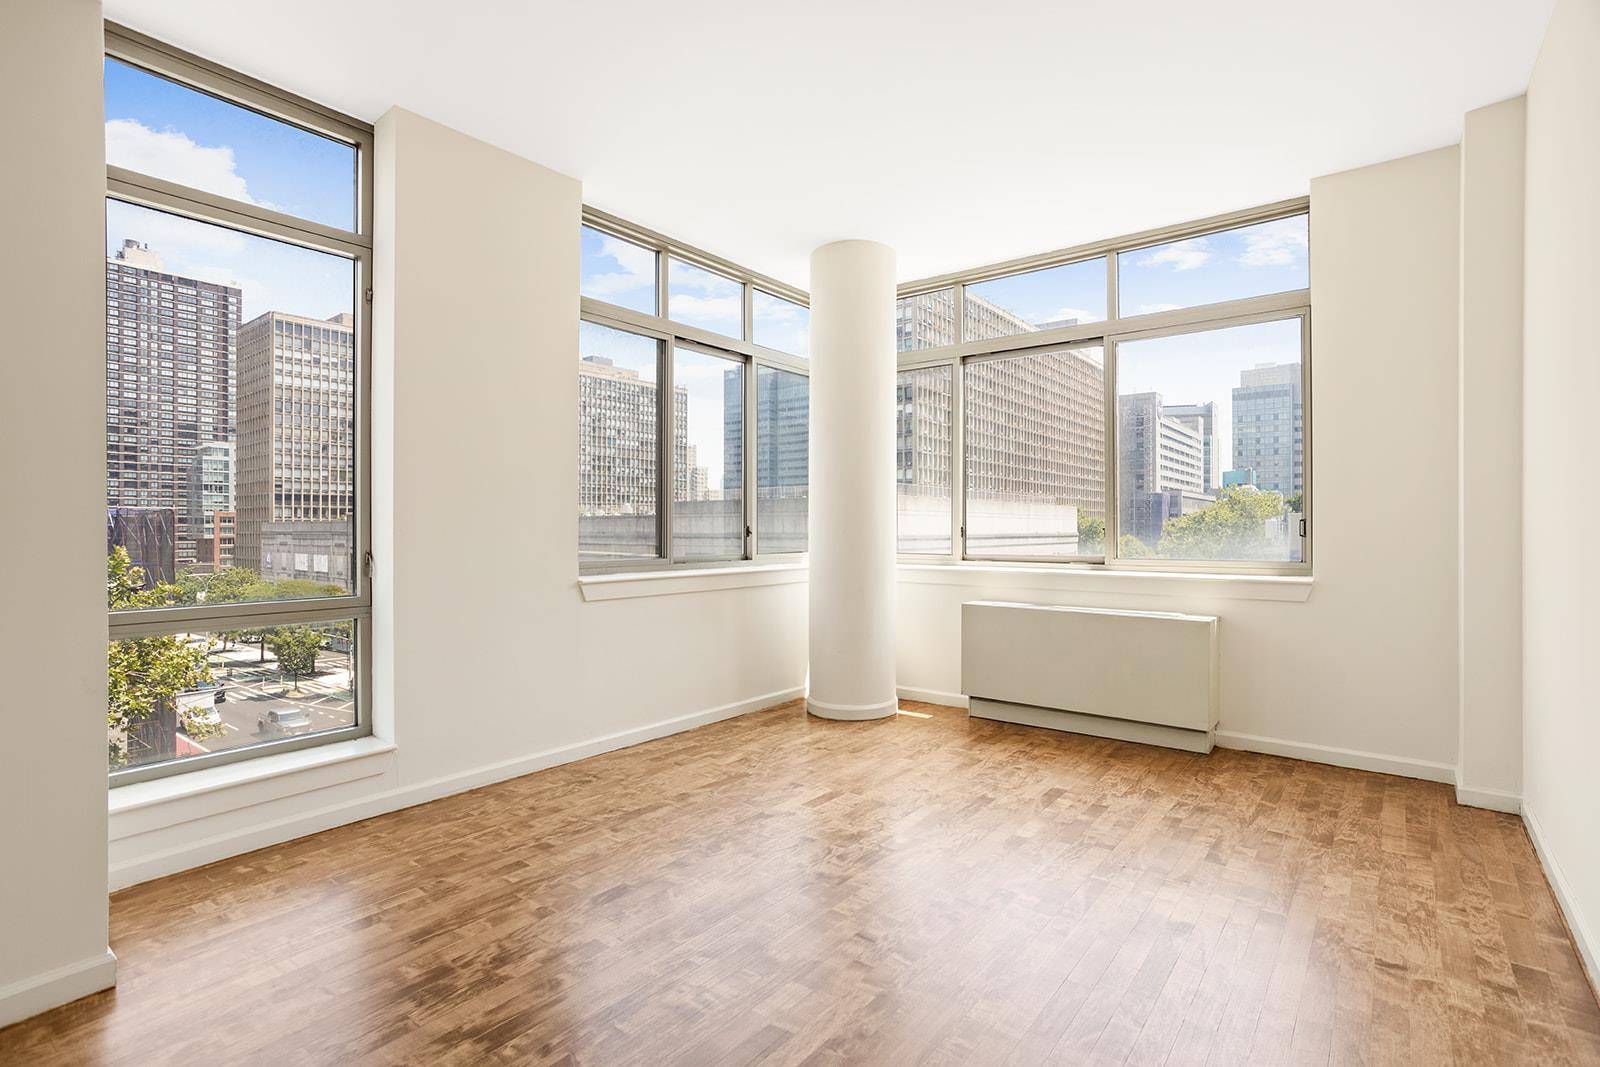 5B is a bright and sunny corner residence in a full service condo near Fairway, Trader Joe's, NYU Langone, Baruch College, and Madison Square Park.